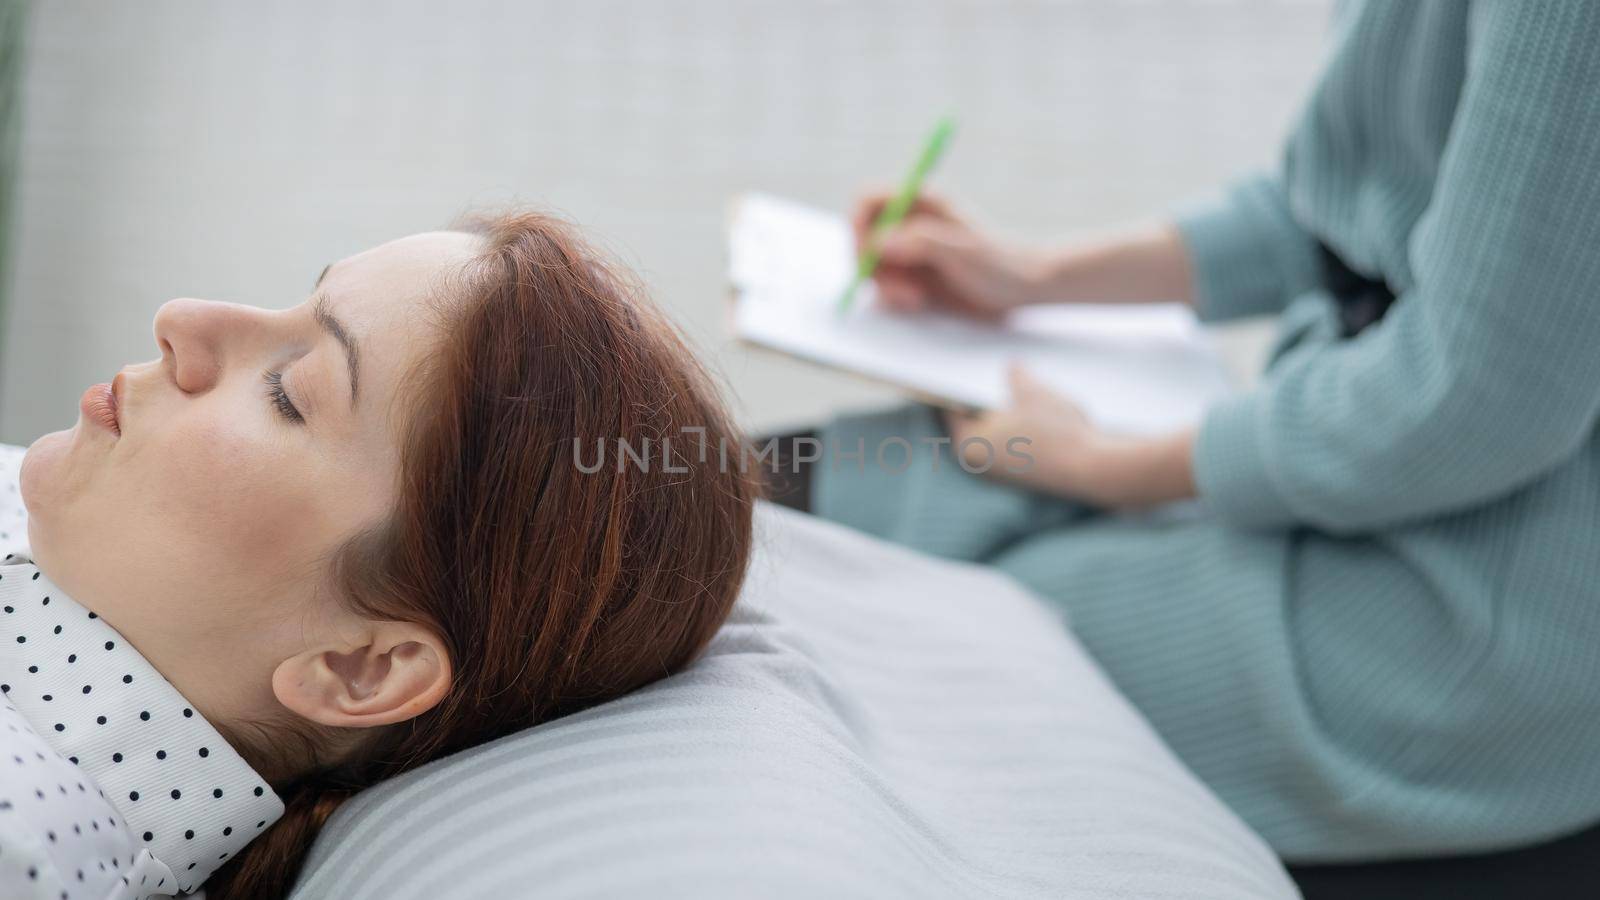 A caucasian woman lies on a couch and expresses her feelings, while a psychologist makes notes on a tablet. by mrwed54